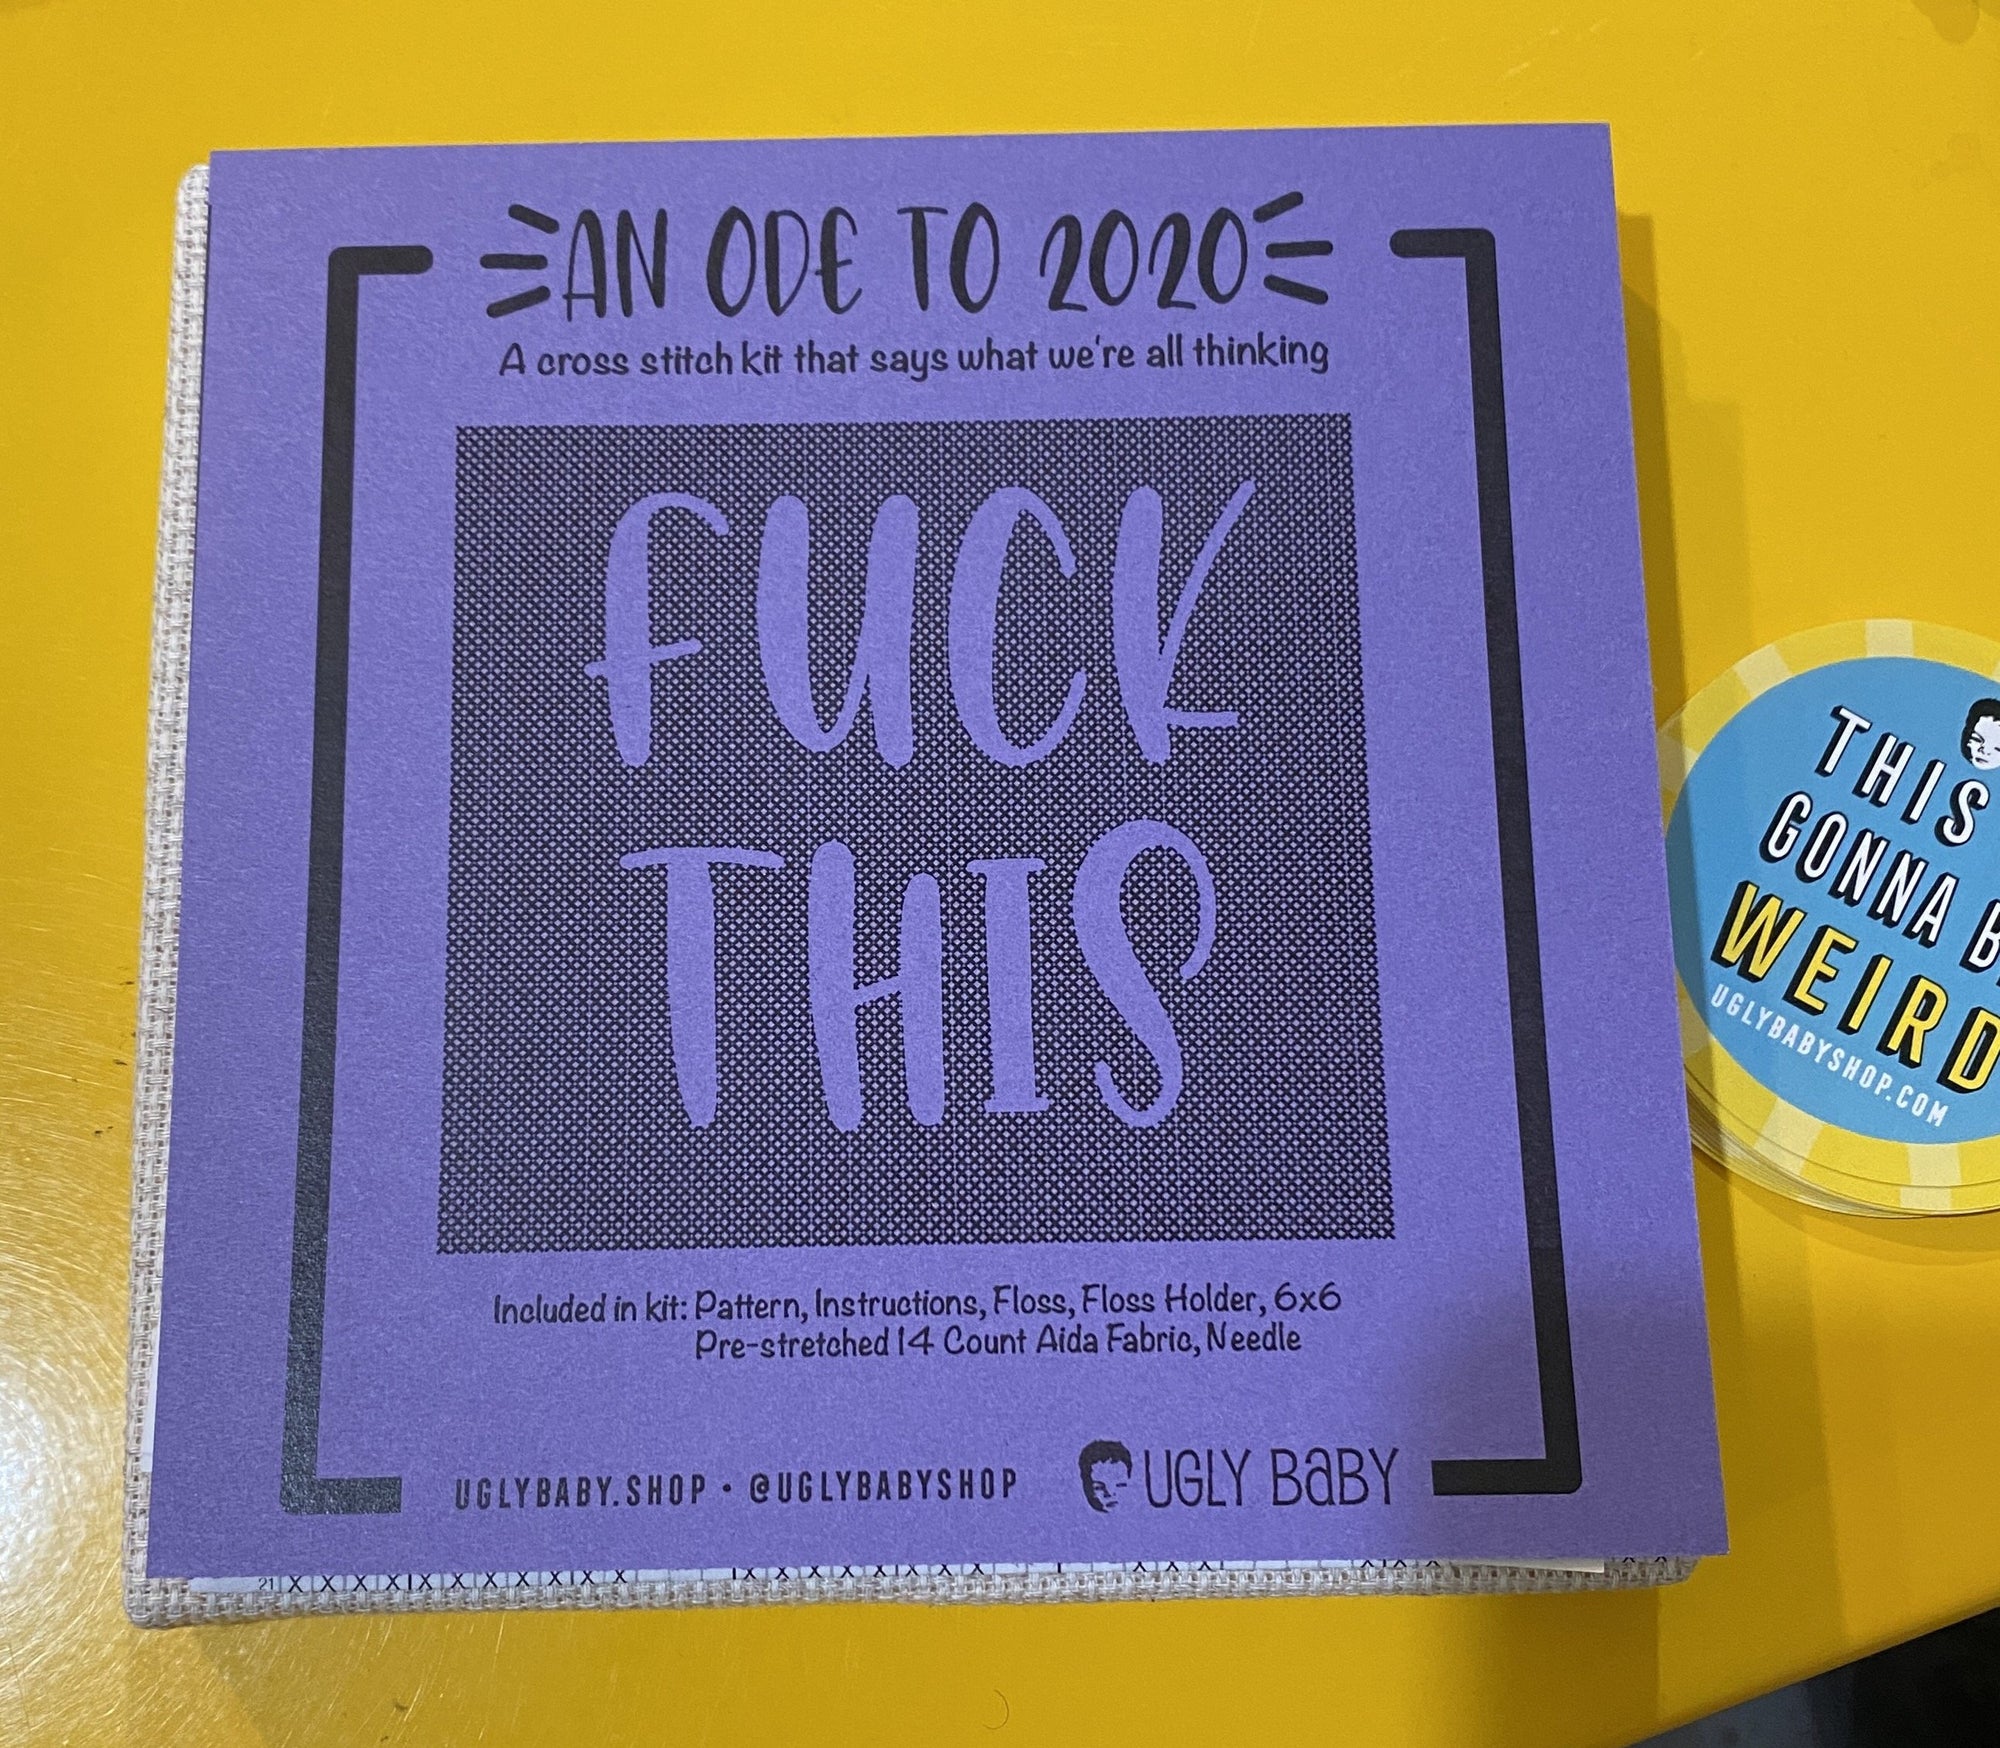 A cross stitch kit. The packaging is purple and says "An ode to 2020. Fuck this." The packaging is dark purple against a bright yellow background. There is a sticker in the right corner that says, "This is gonna be weird." 